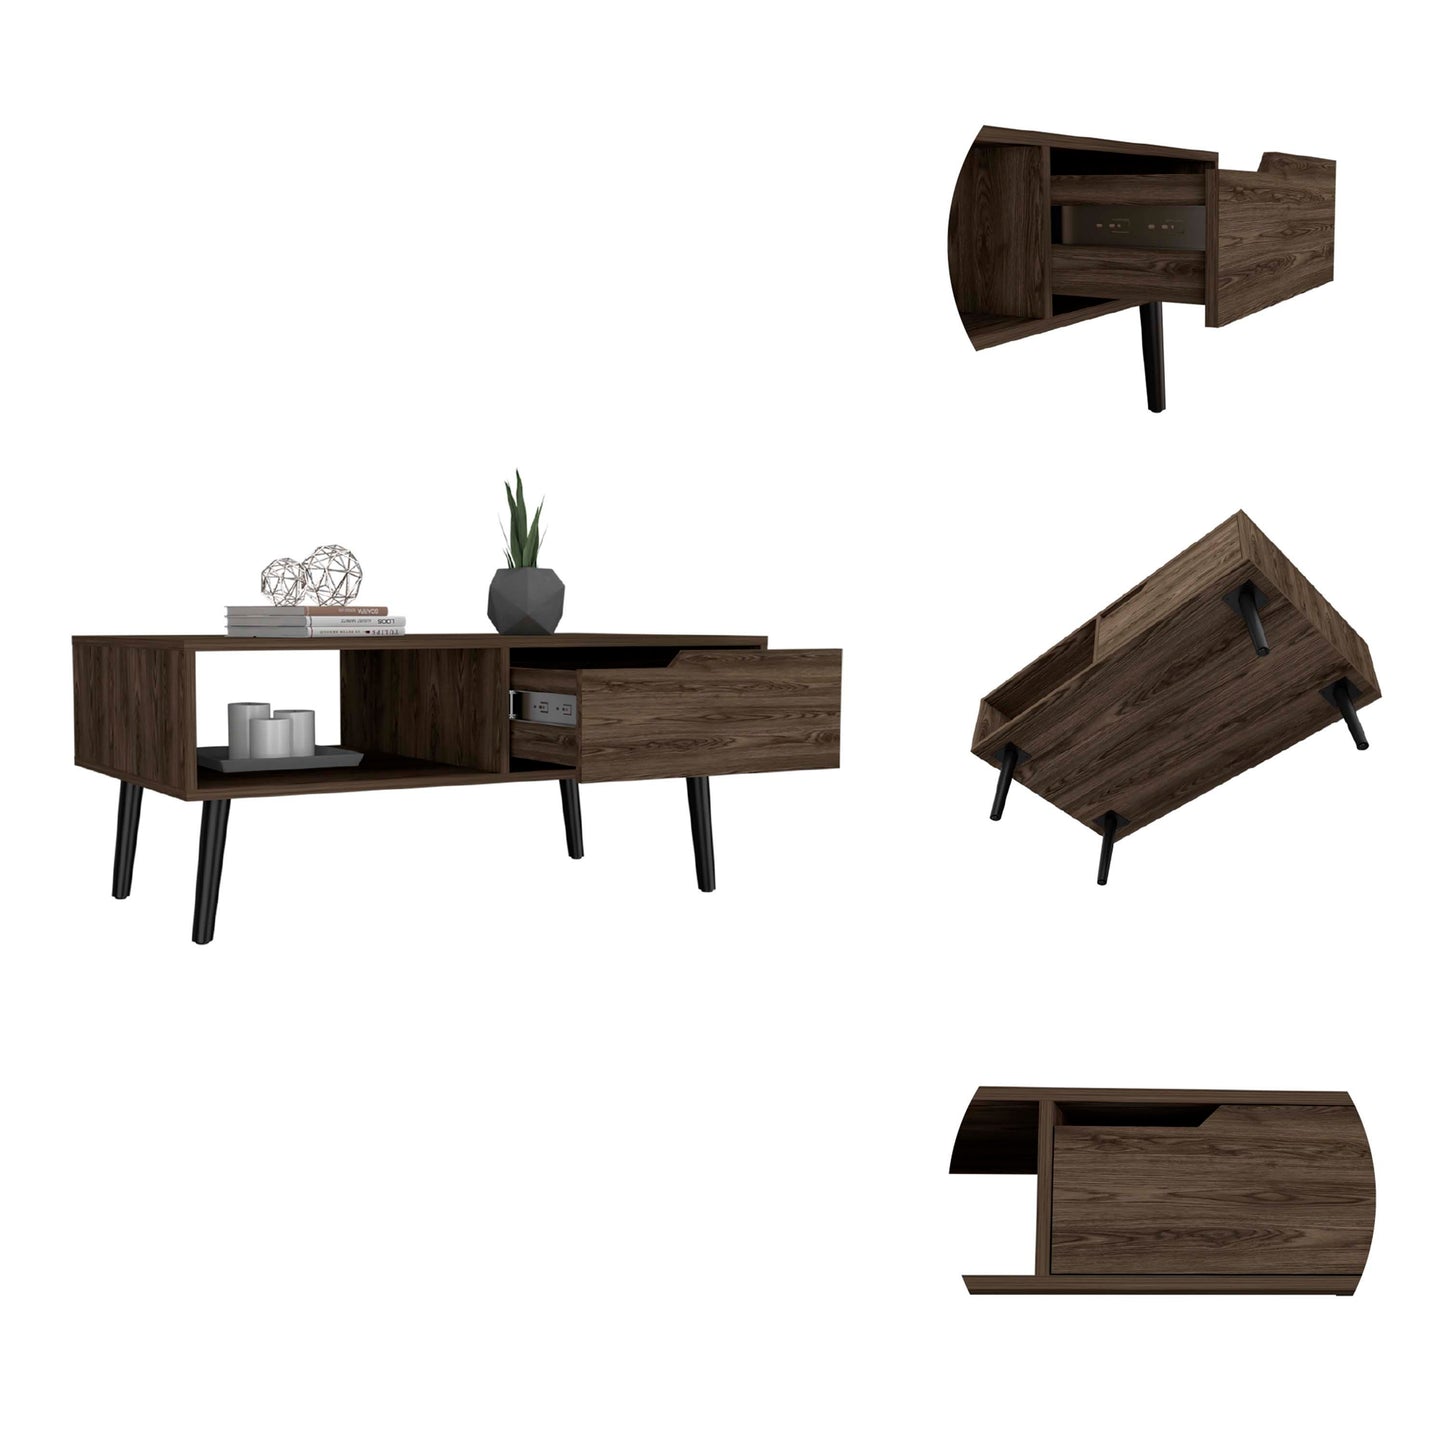 Brown Coffee Table with Open Shelf and Drawer - Stylish Furniture Piece